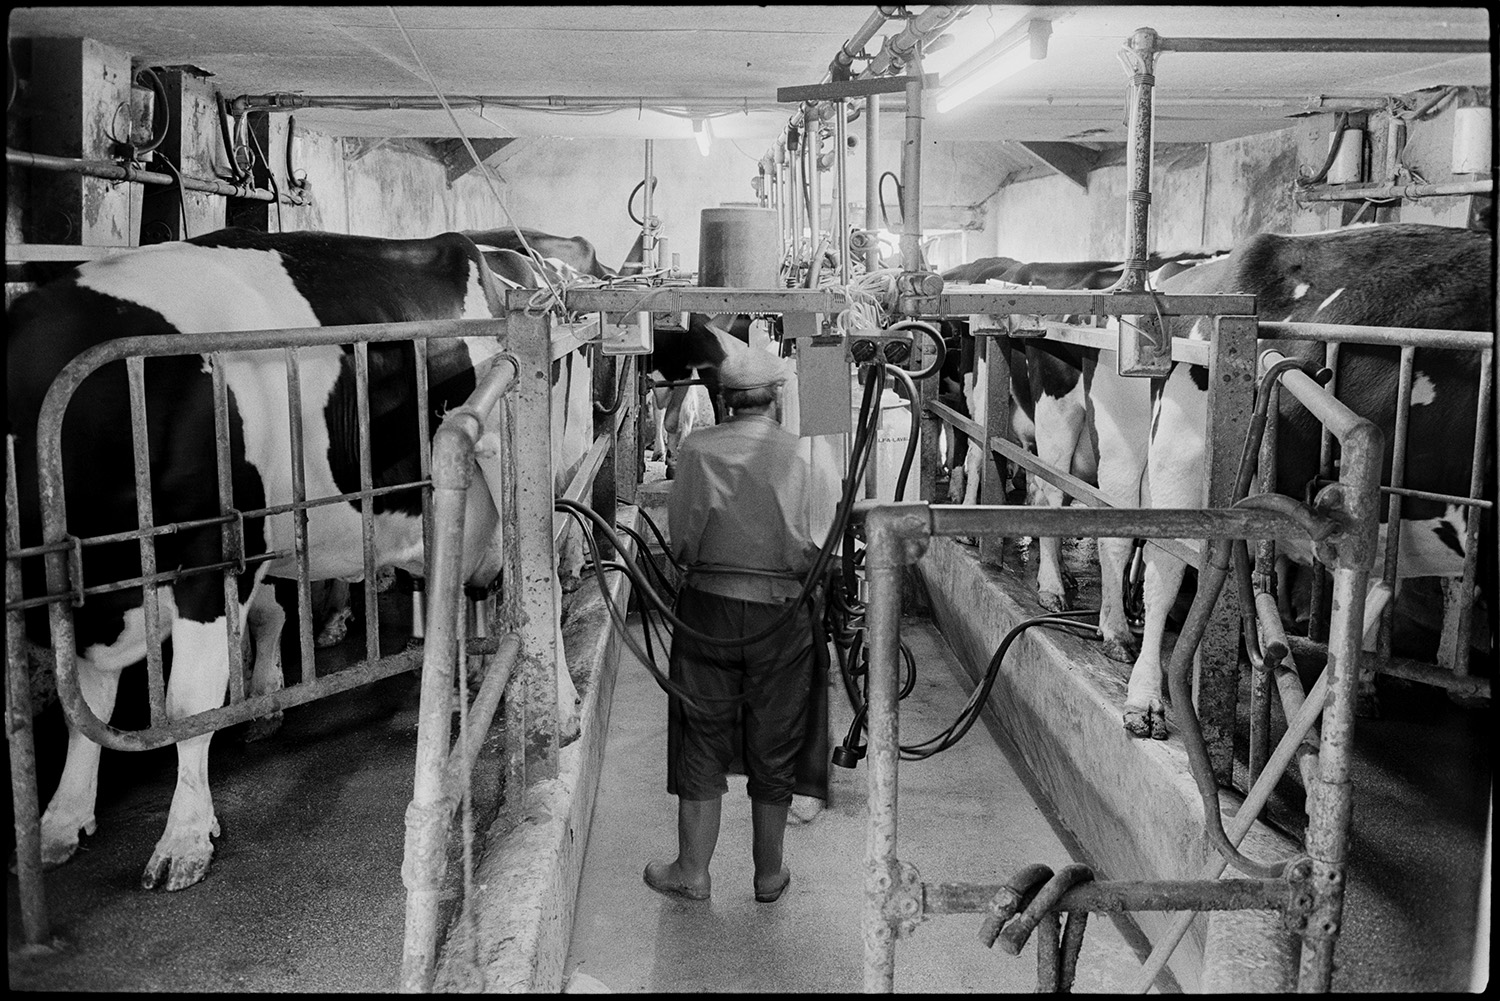 Milking parlour and farmer.
[Mr Lock working milking machinery in the milking parlour at Cleave Farm, Dolton, to milk a dairy herd.]